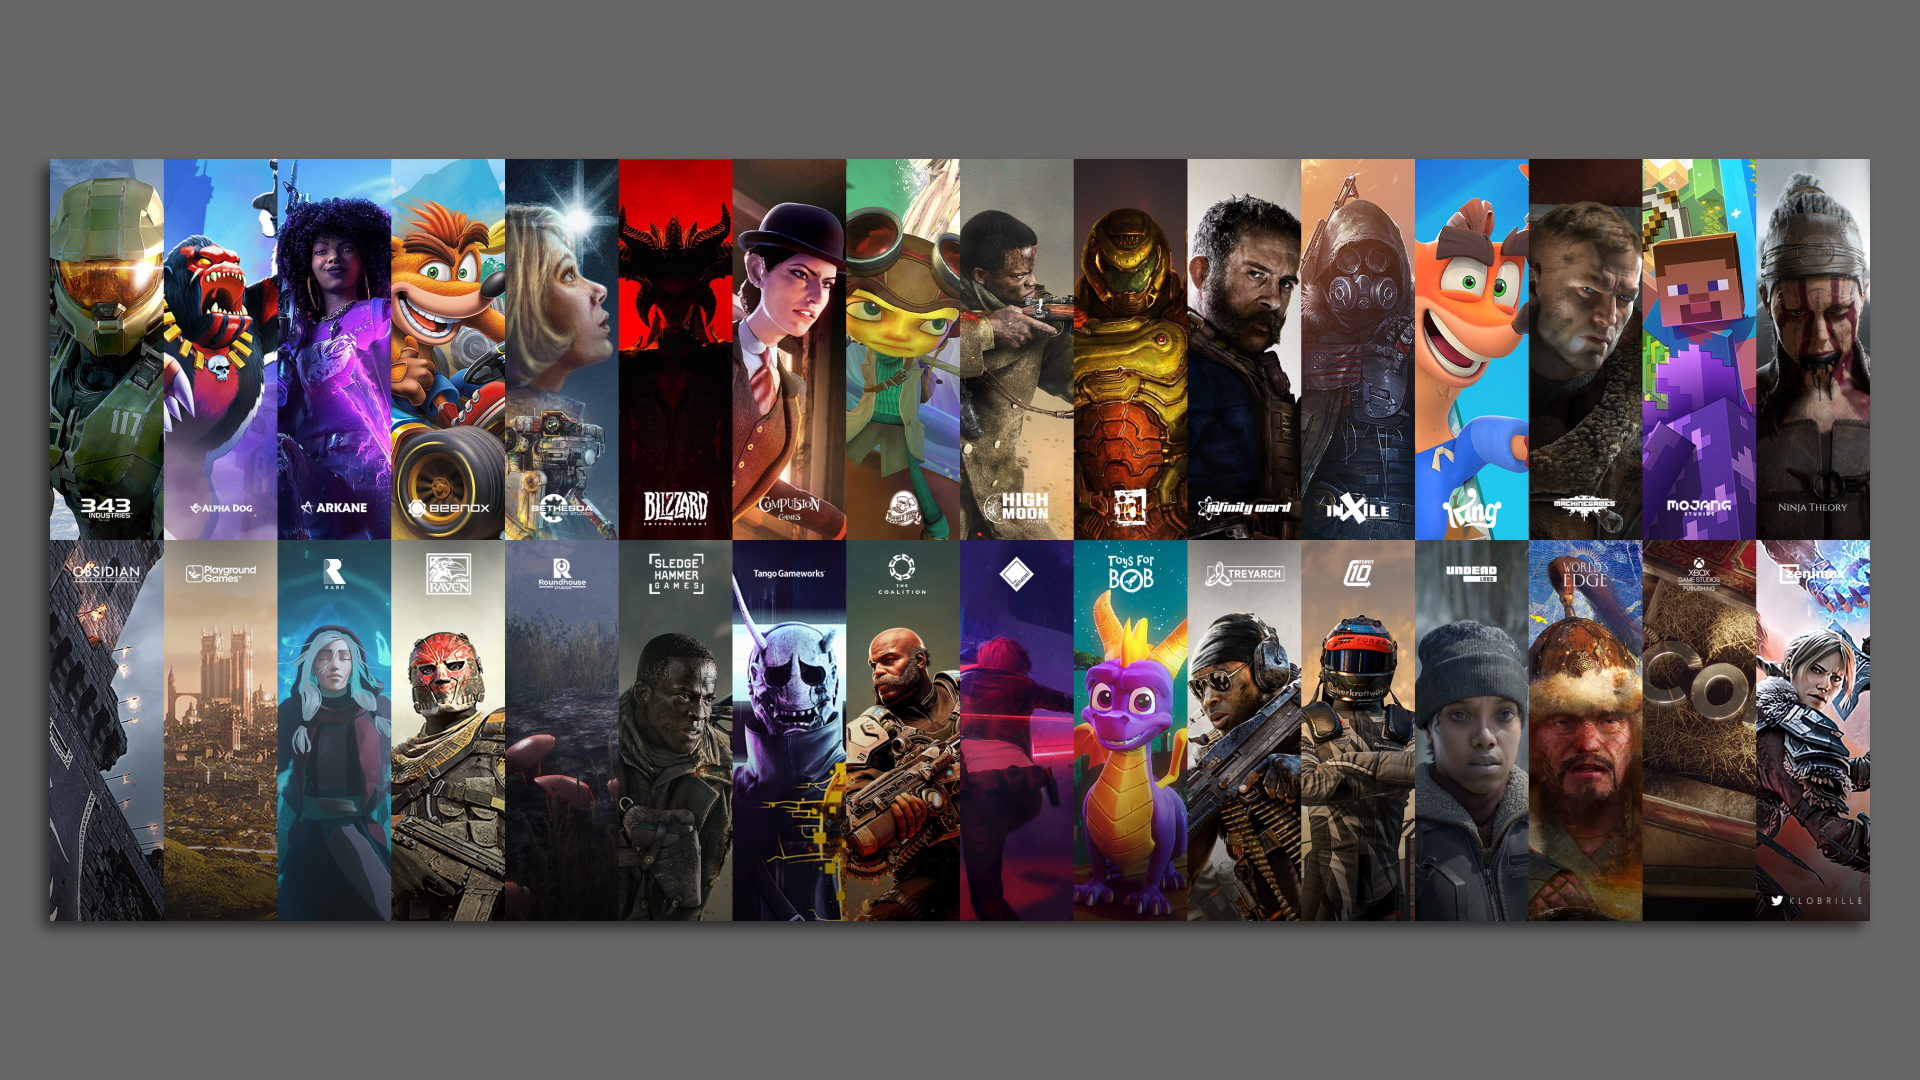 A composite image showing logos and character art for the game studios Microsoft would own if it buys Activision Blizzard